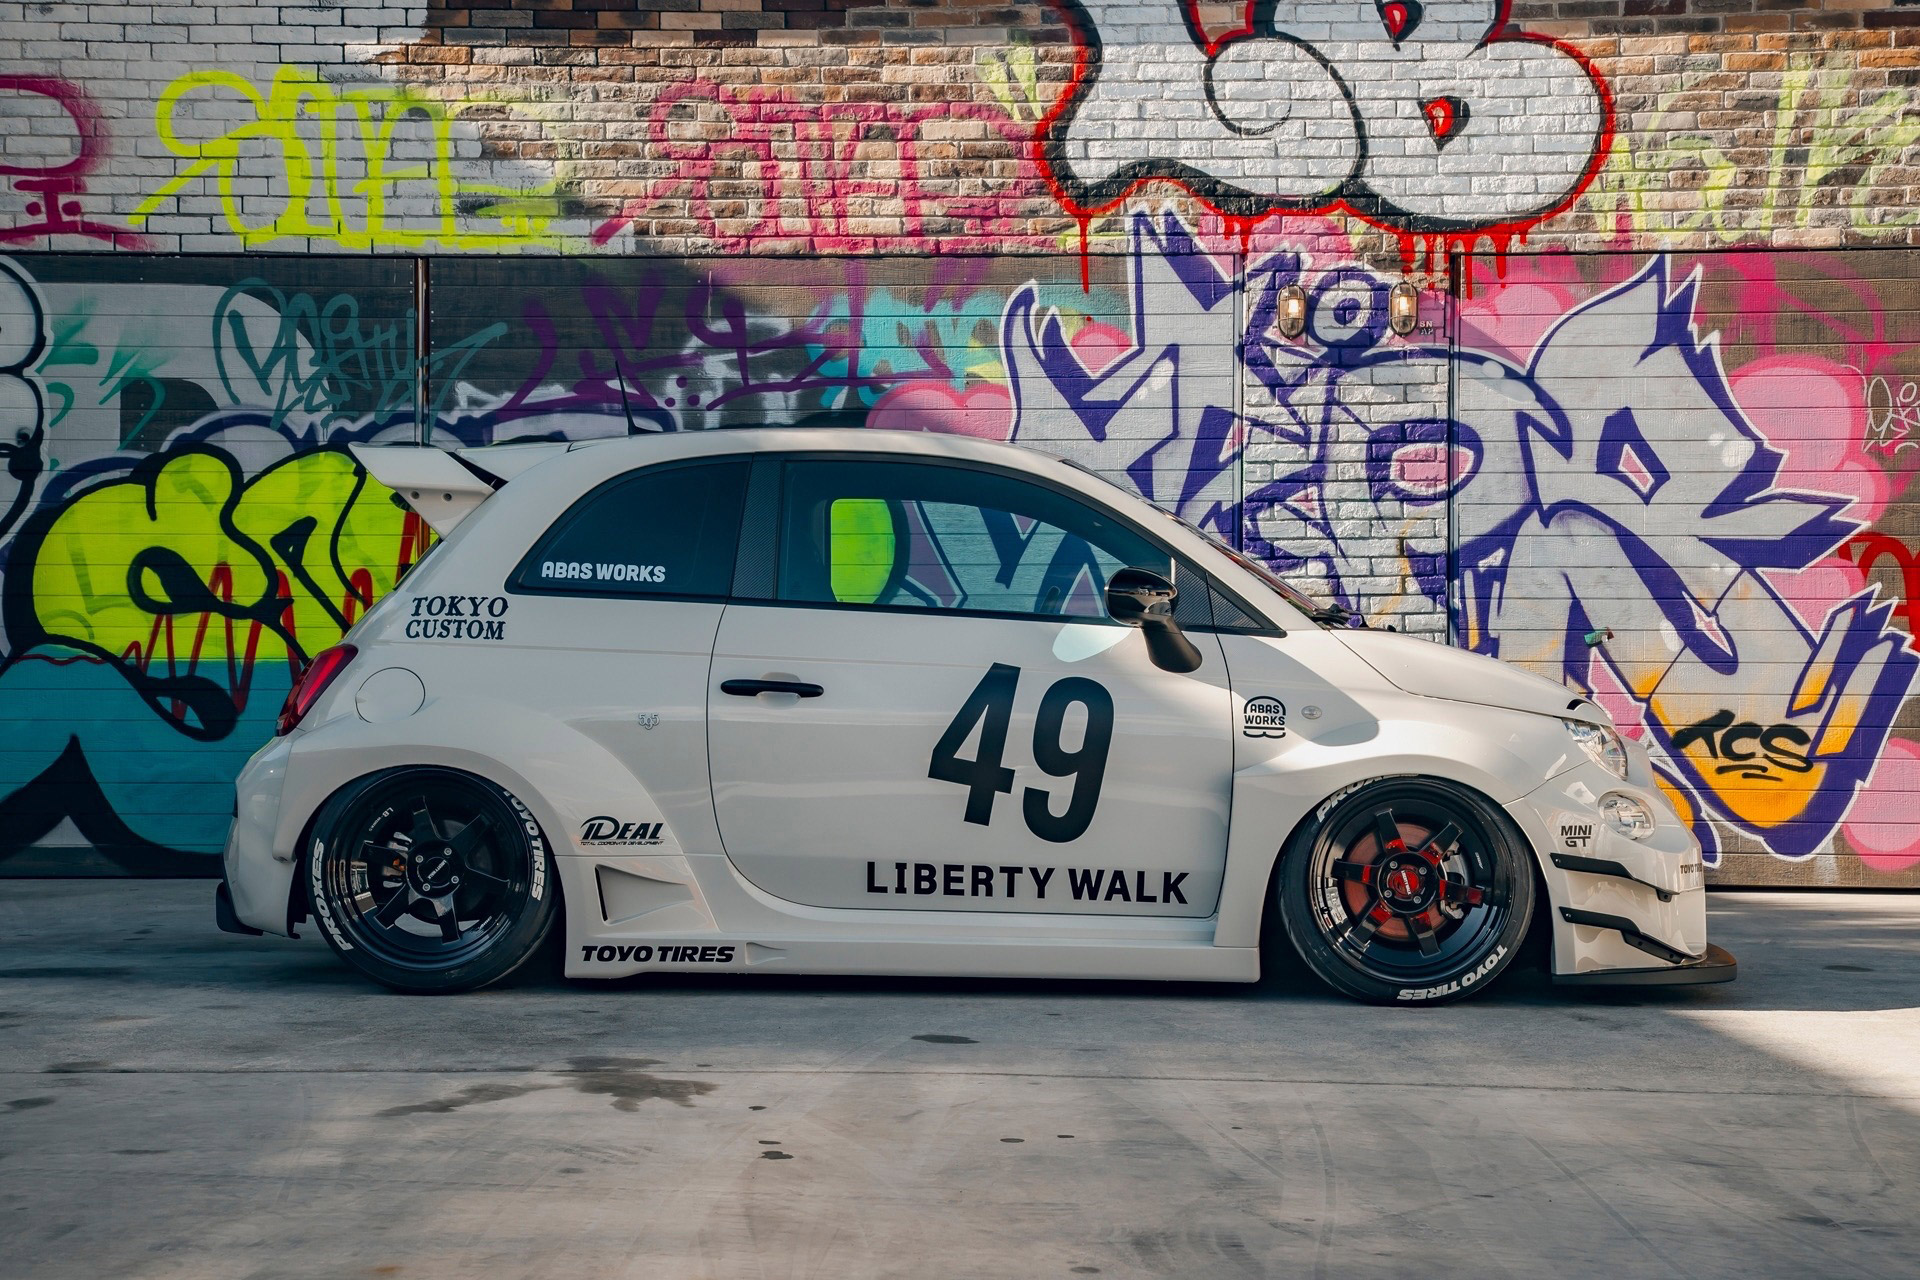 LB-WORKS x Abas Works ABARTH 59500001